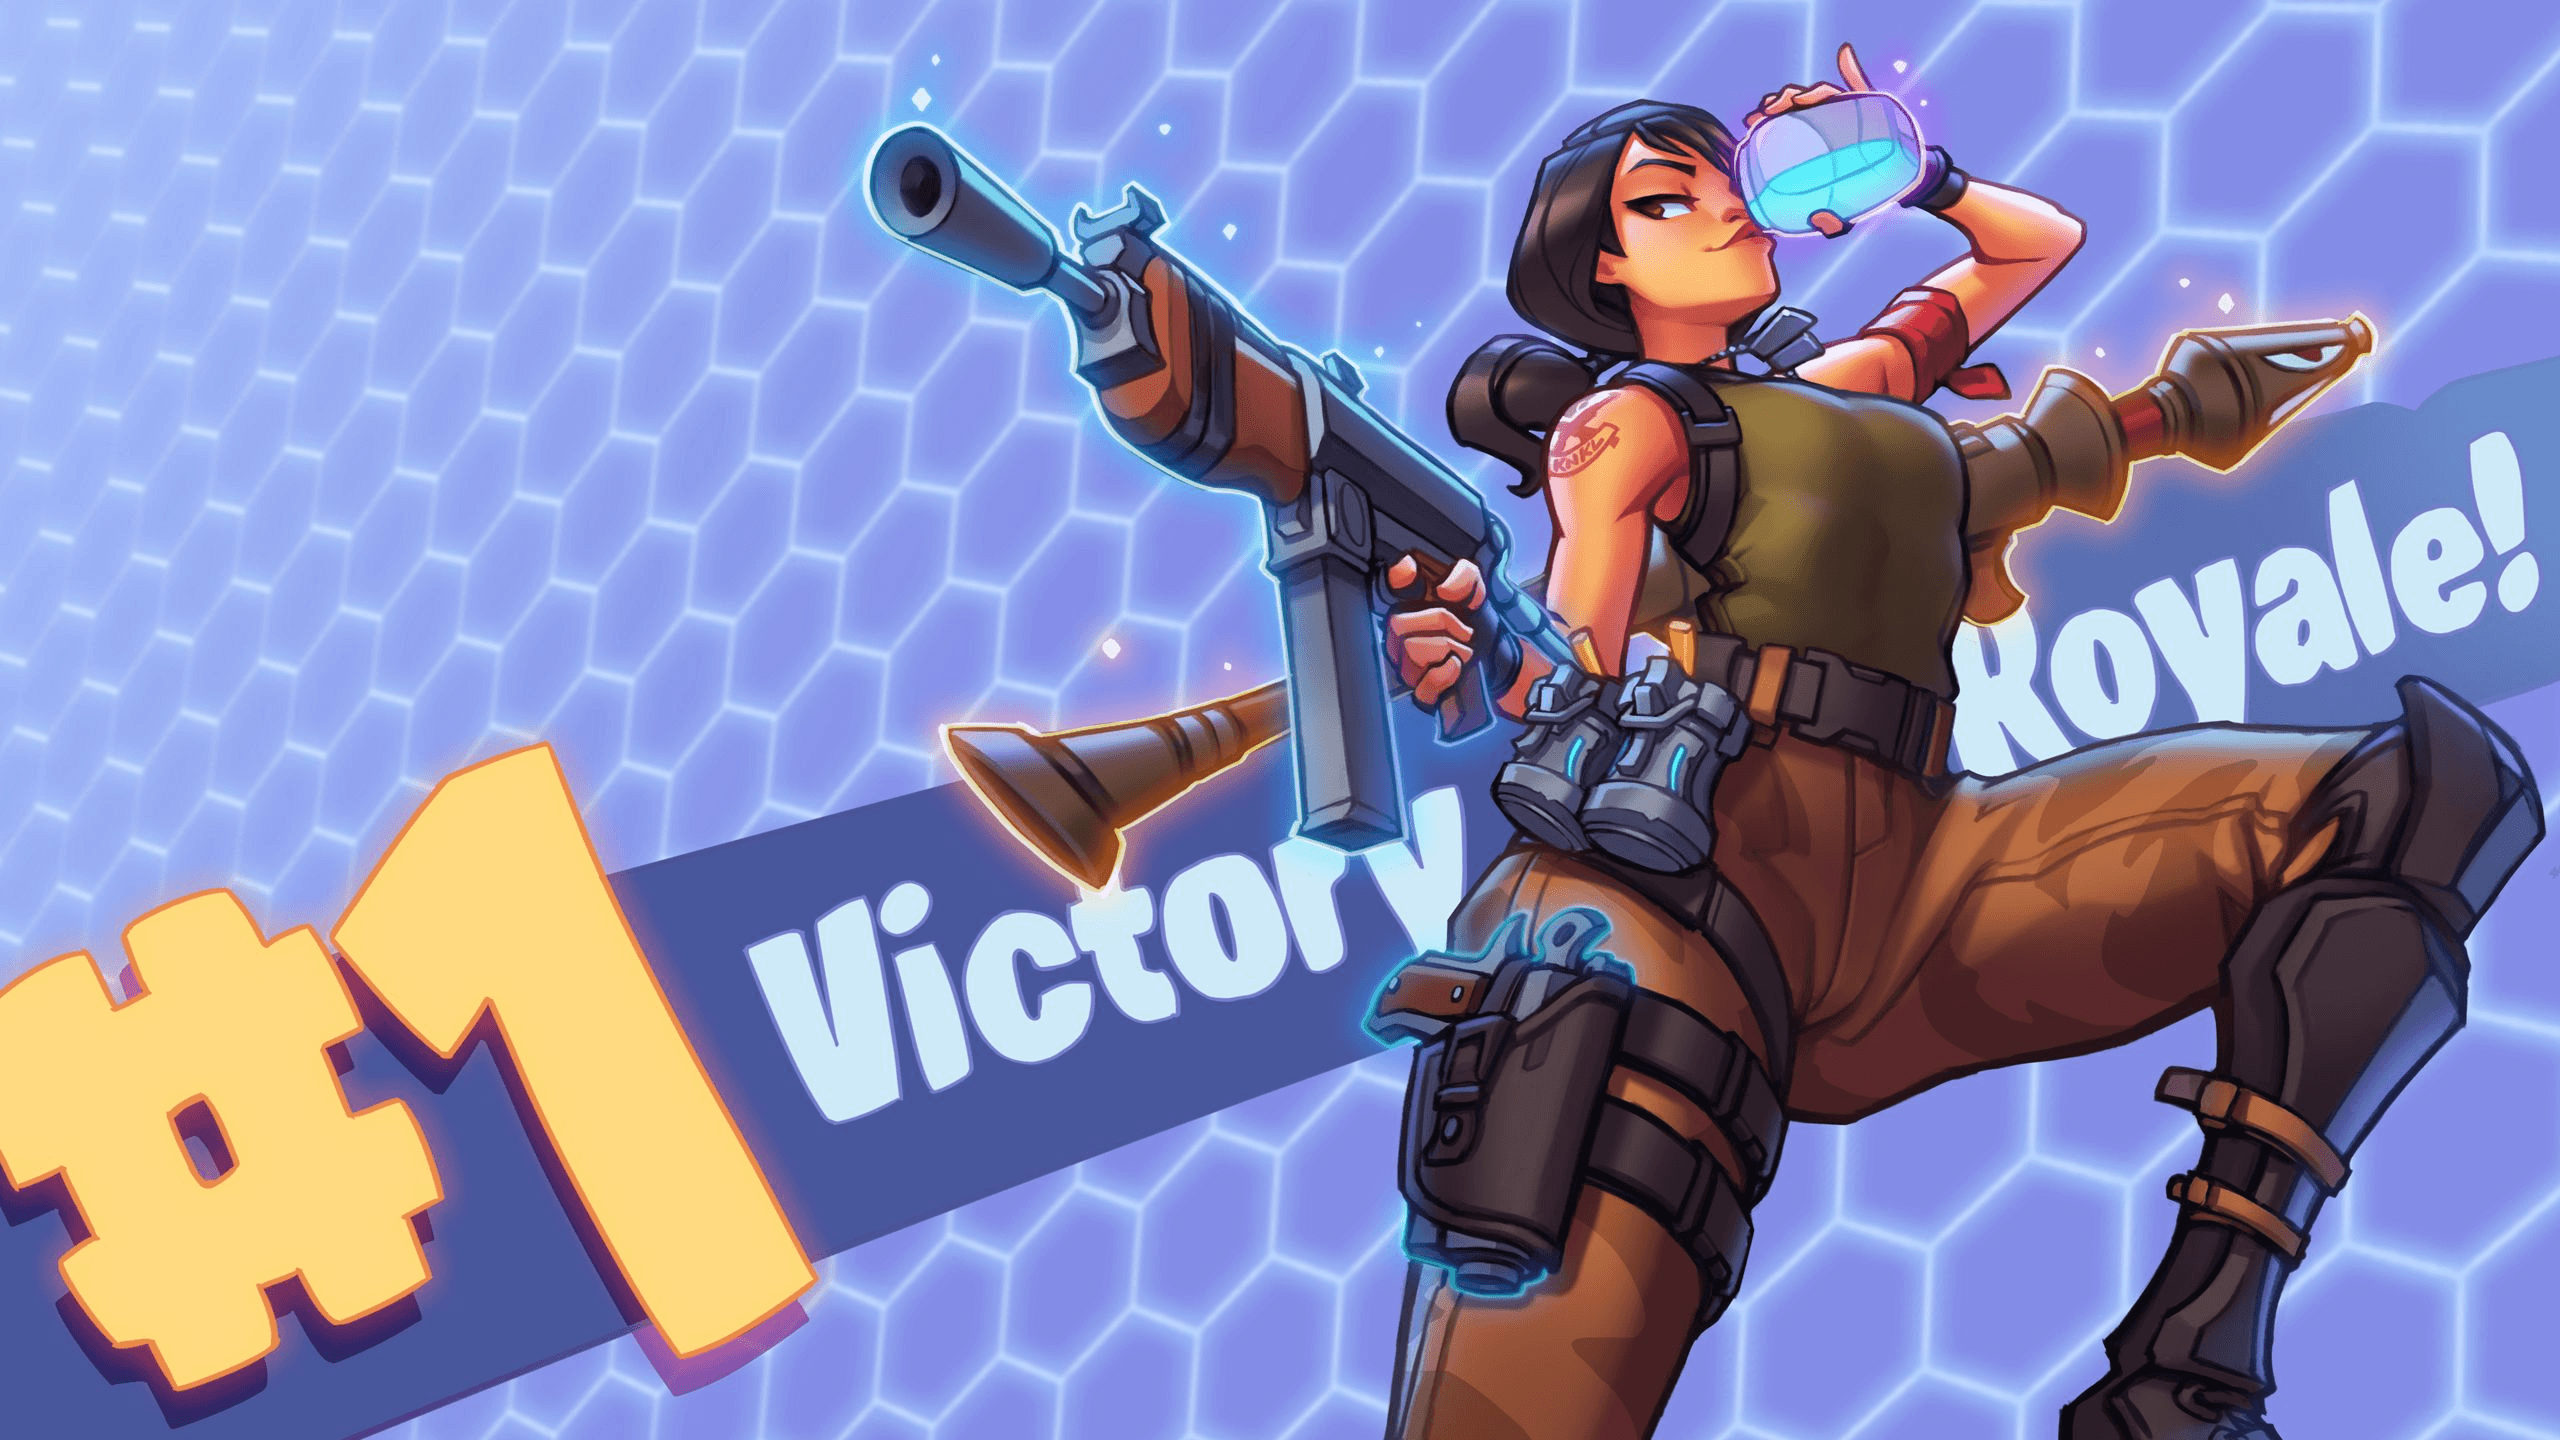 Fortnite: Battle Royale Wallpapers - Page 3 of 3 - The RamenSwag